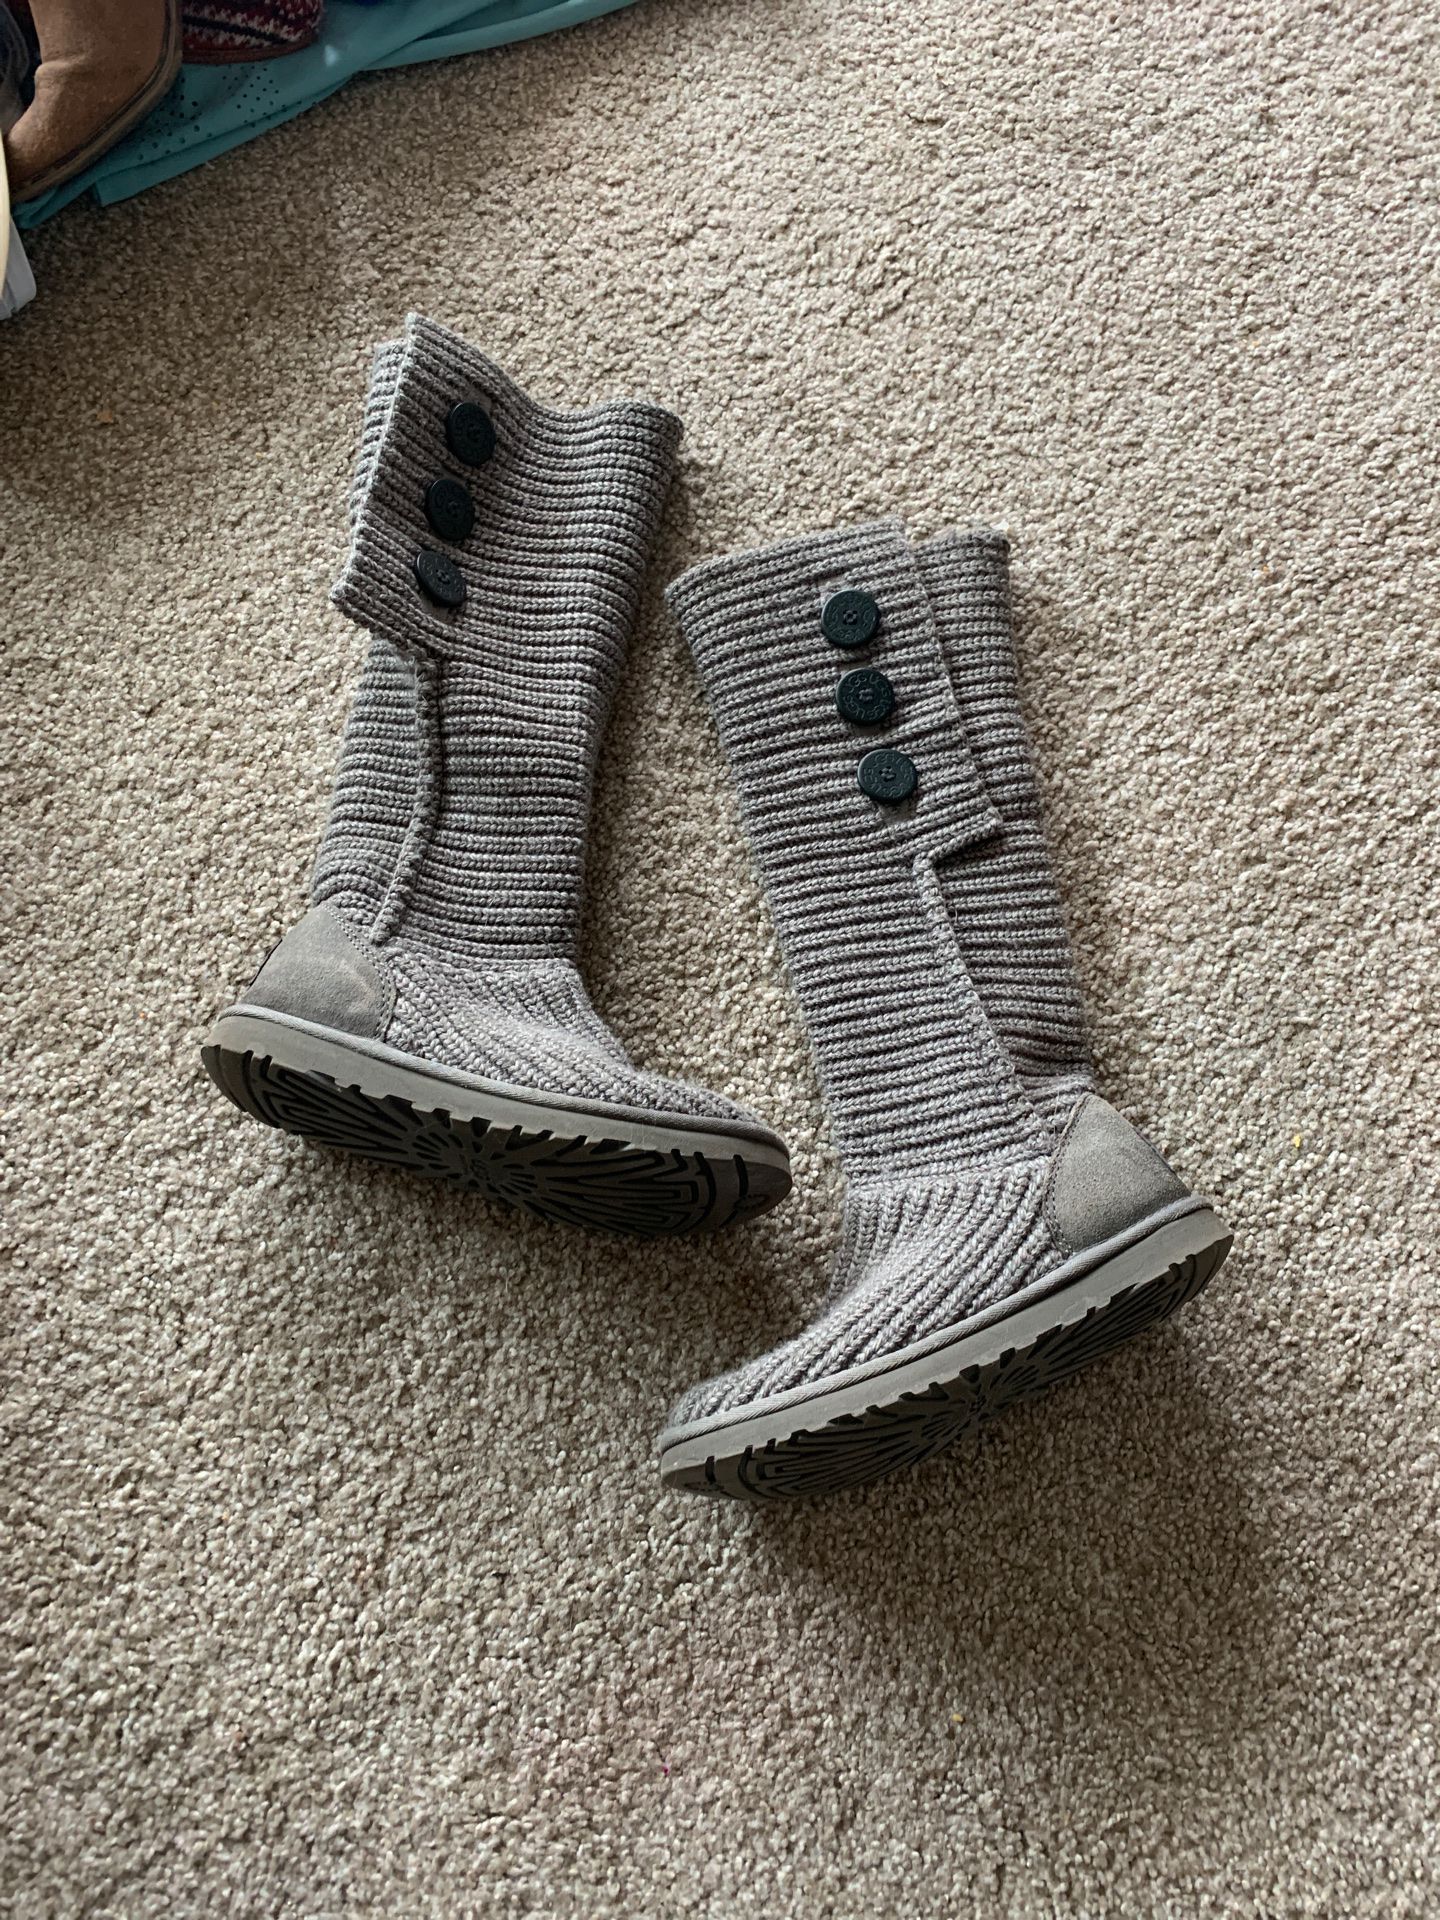 UGG gray sweater boots size 7